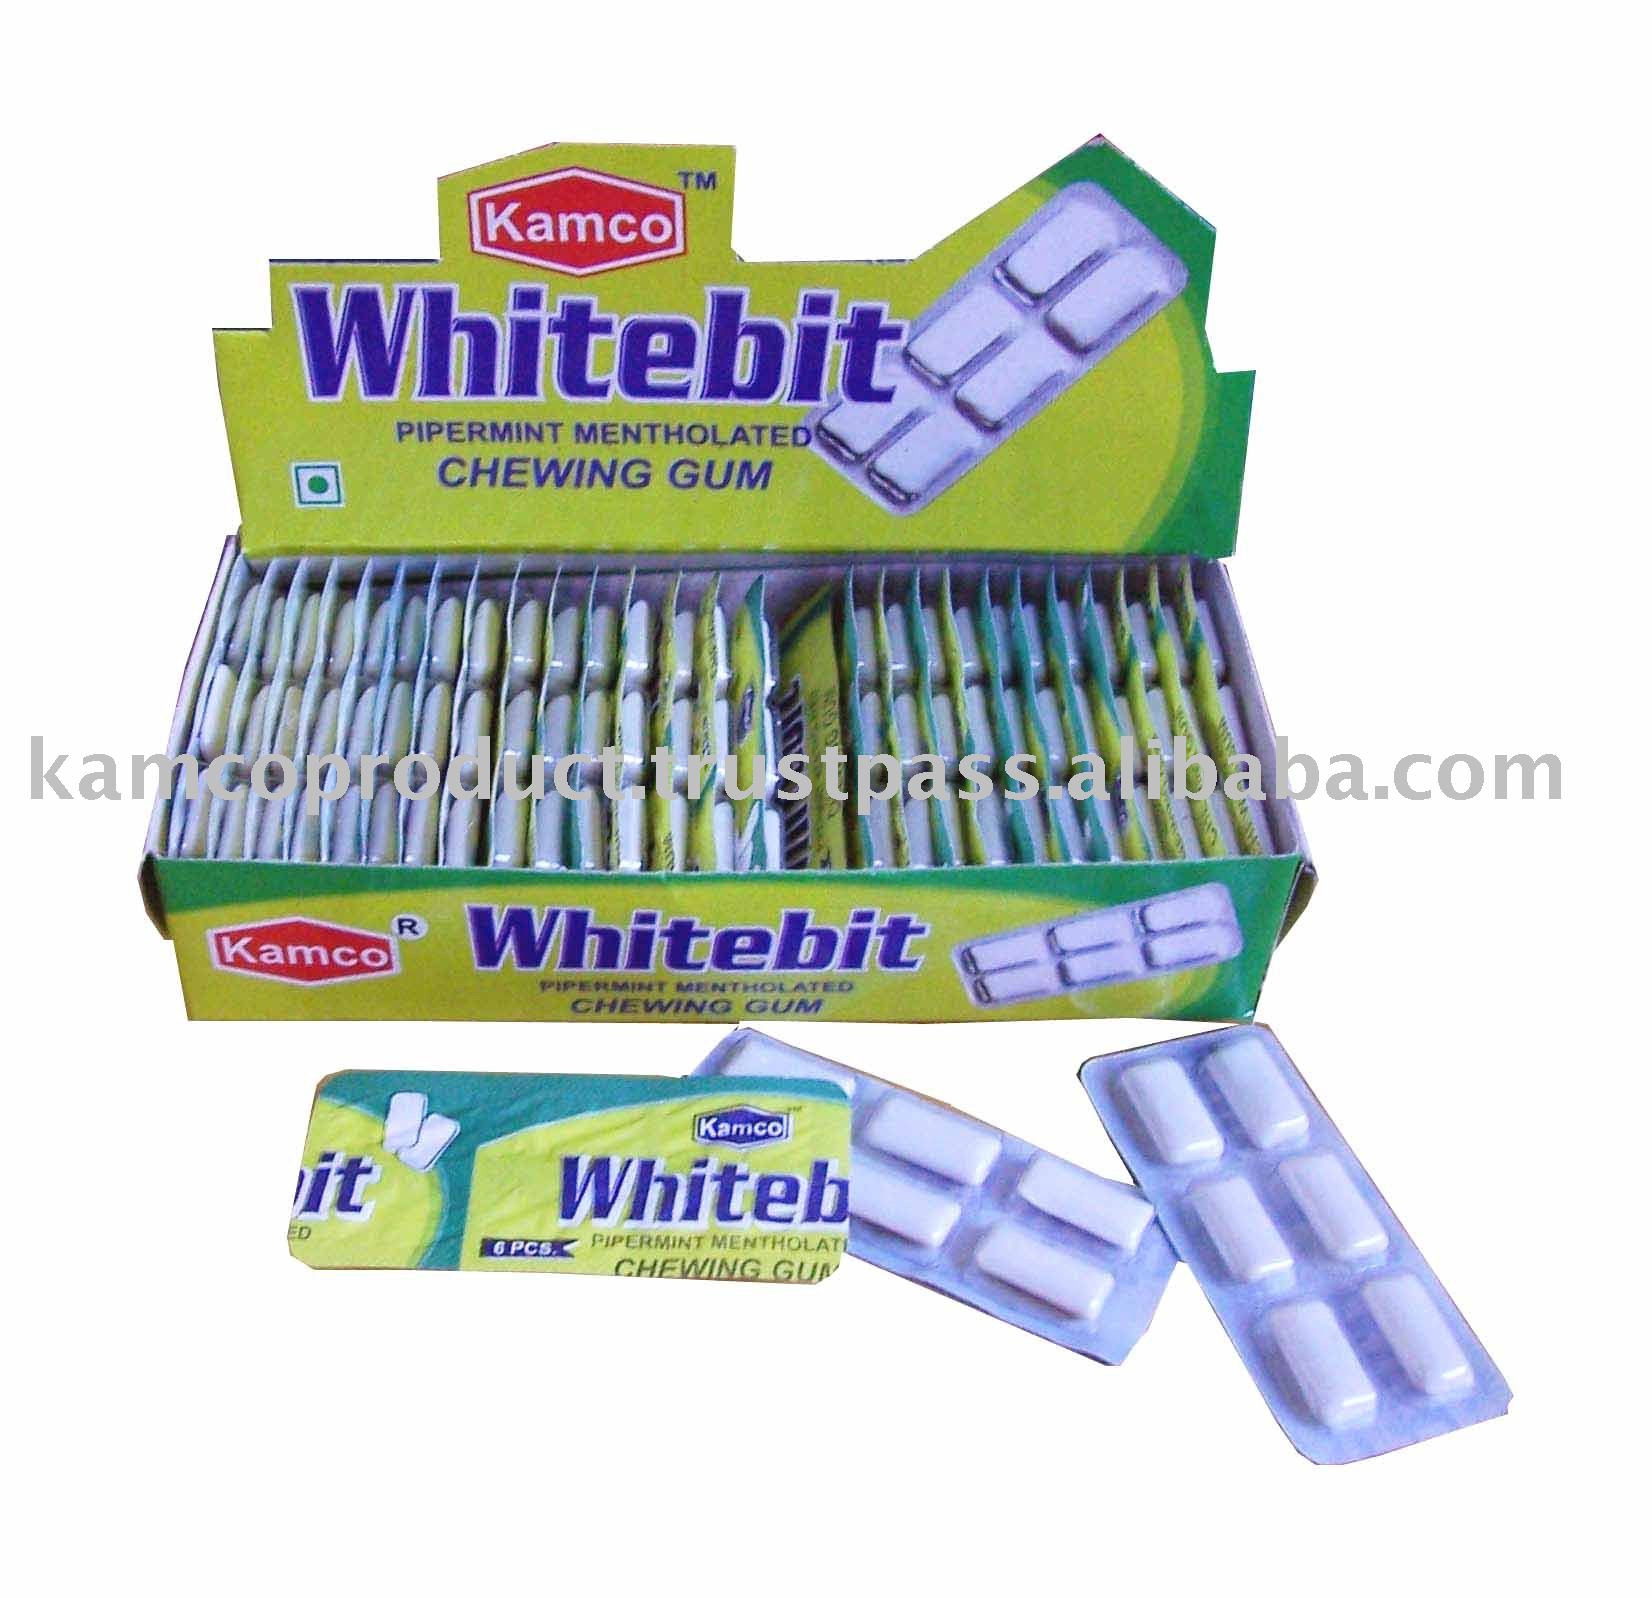 Pippermint Chewing Gum ( Whitebit ) products,India ...